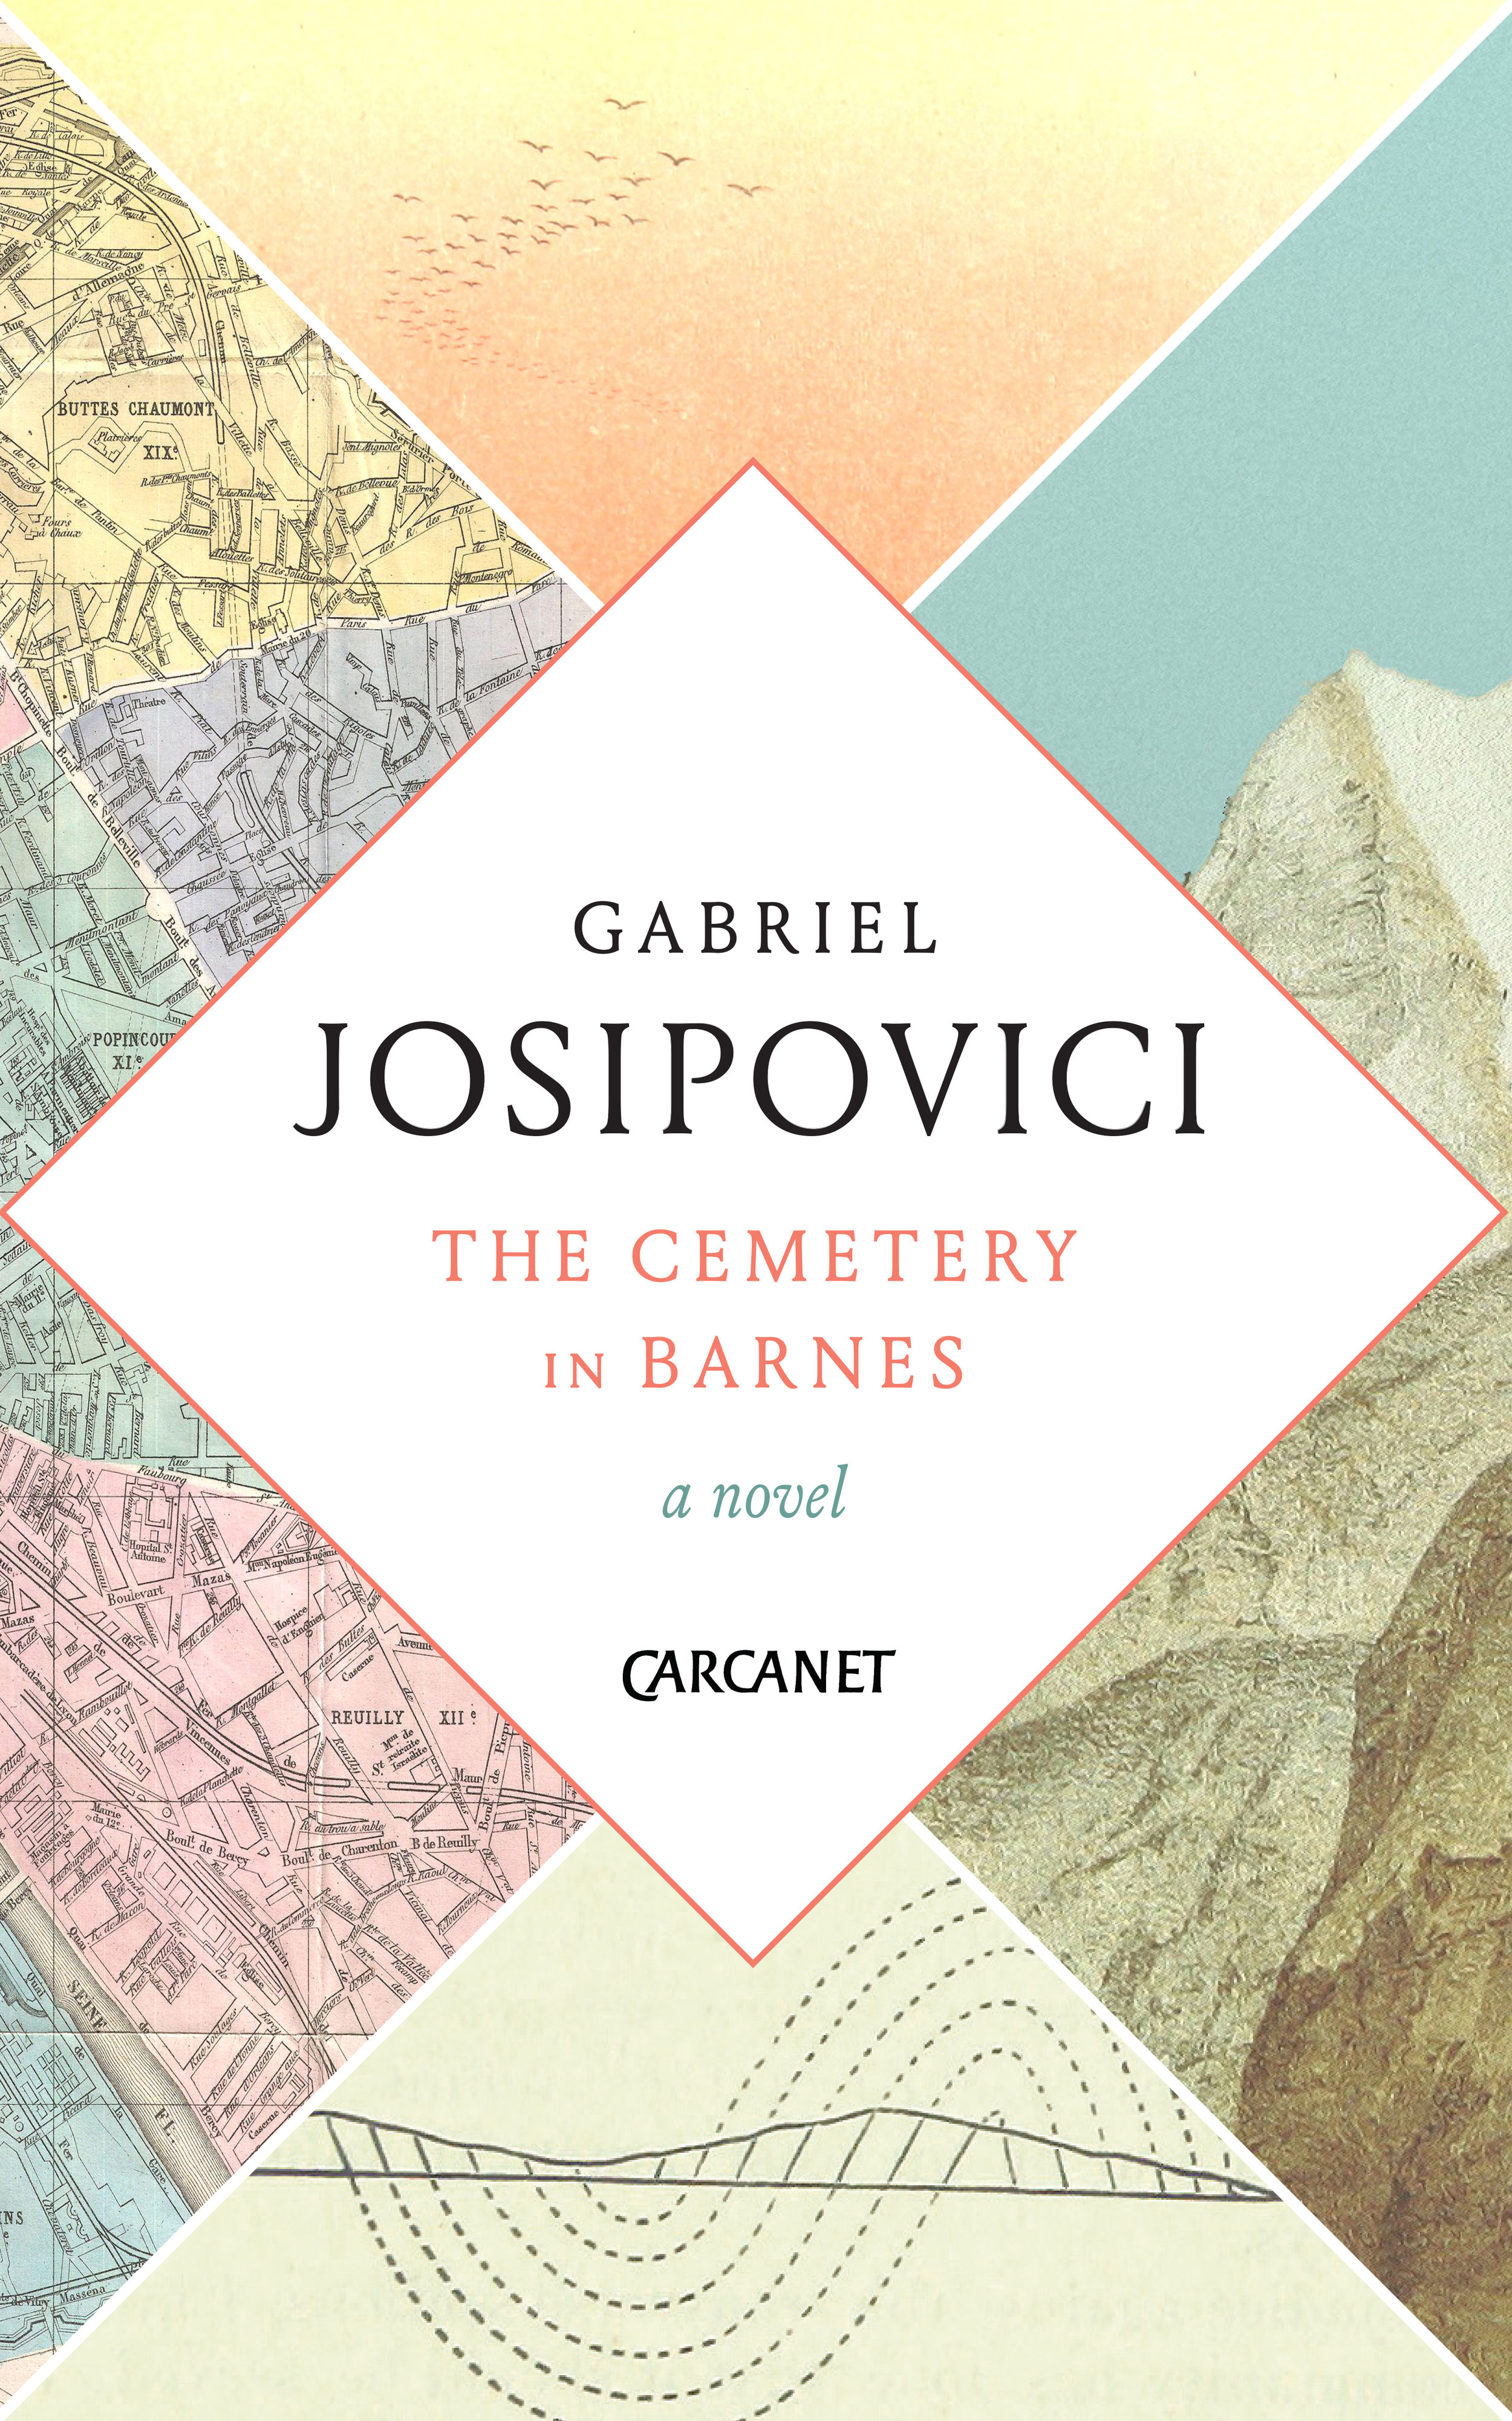 The Cemetery in Barnes by Gabriel Josipovici, Carcanet 